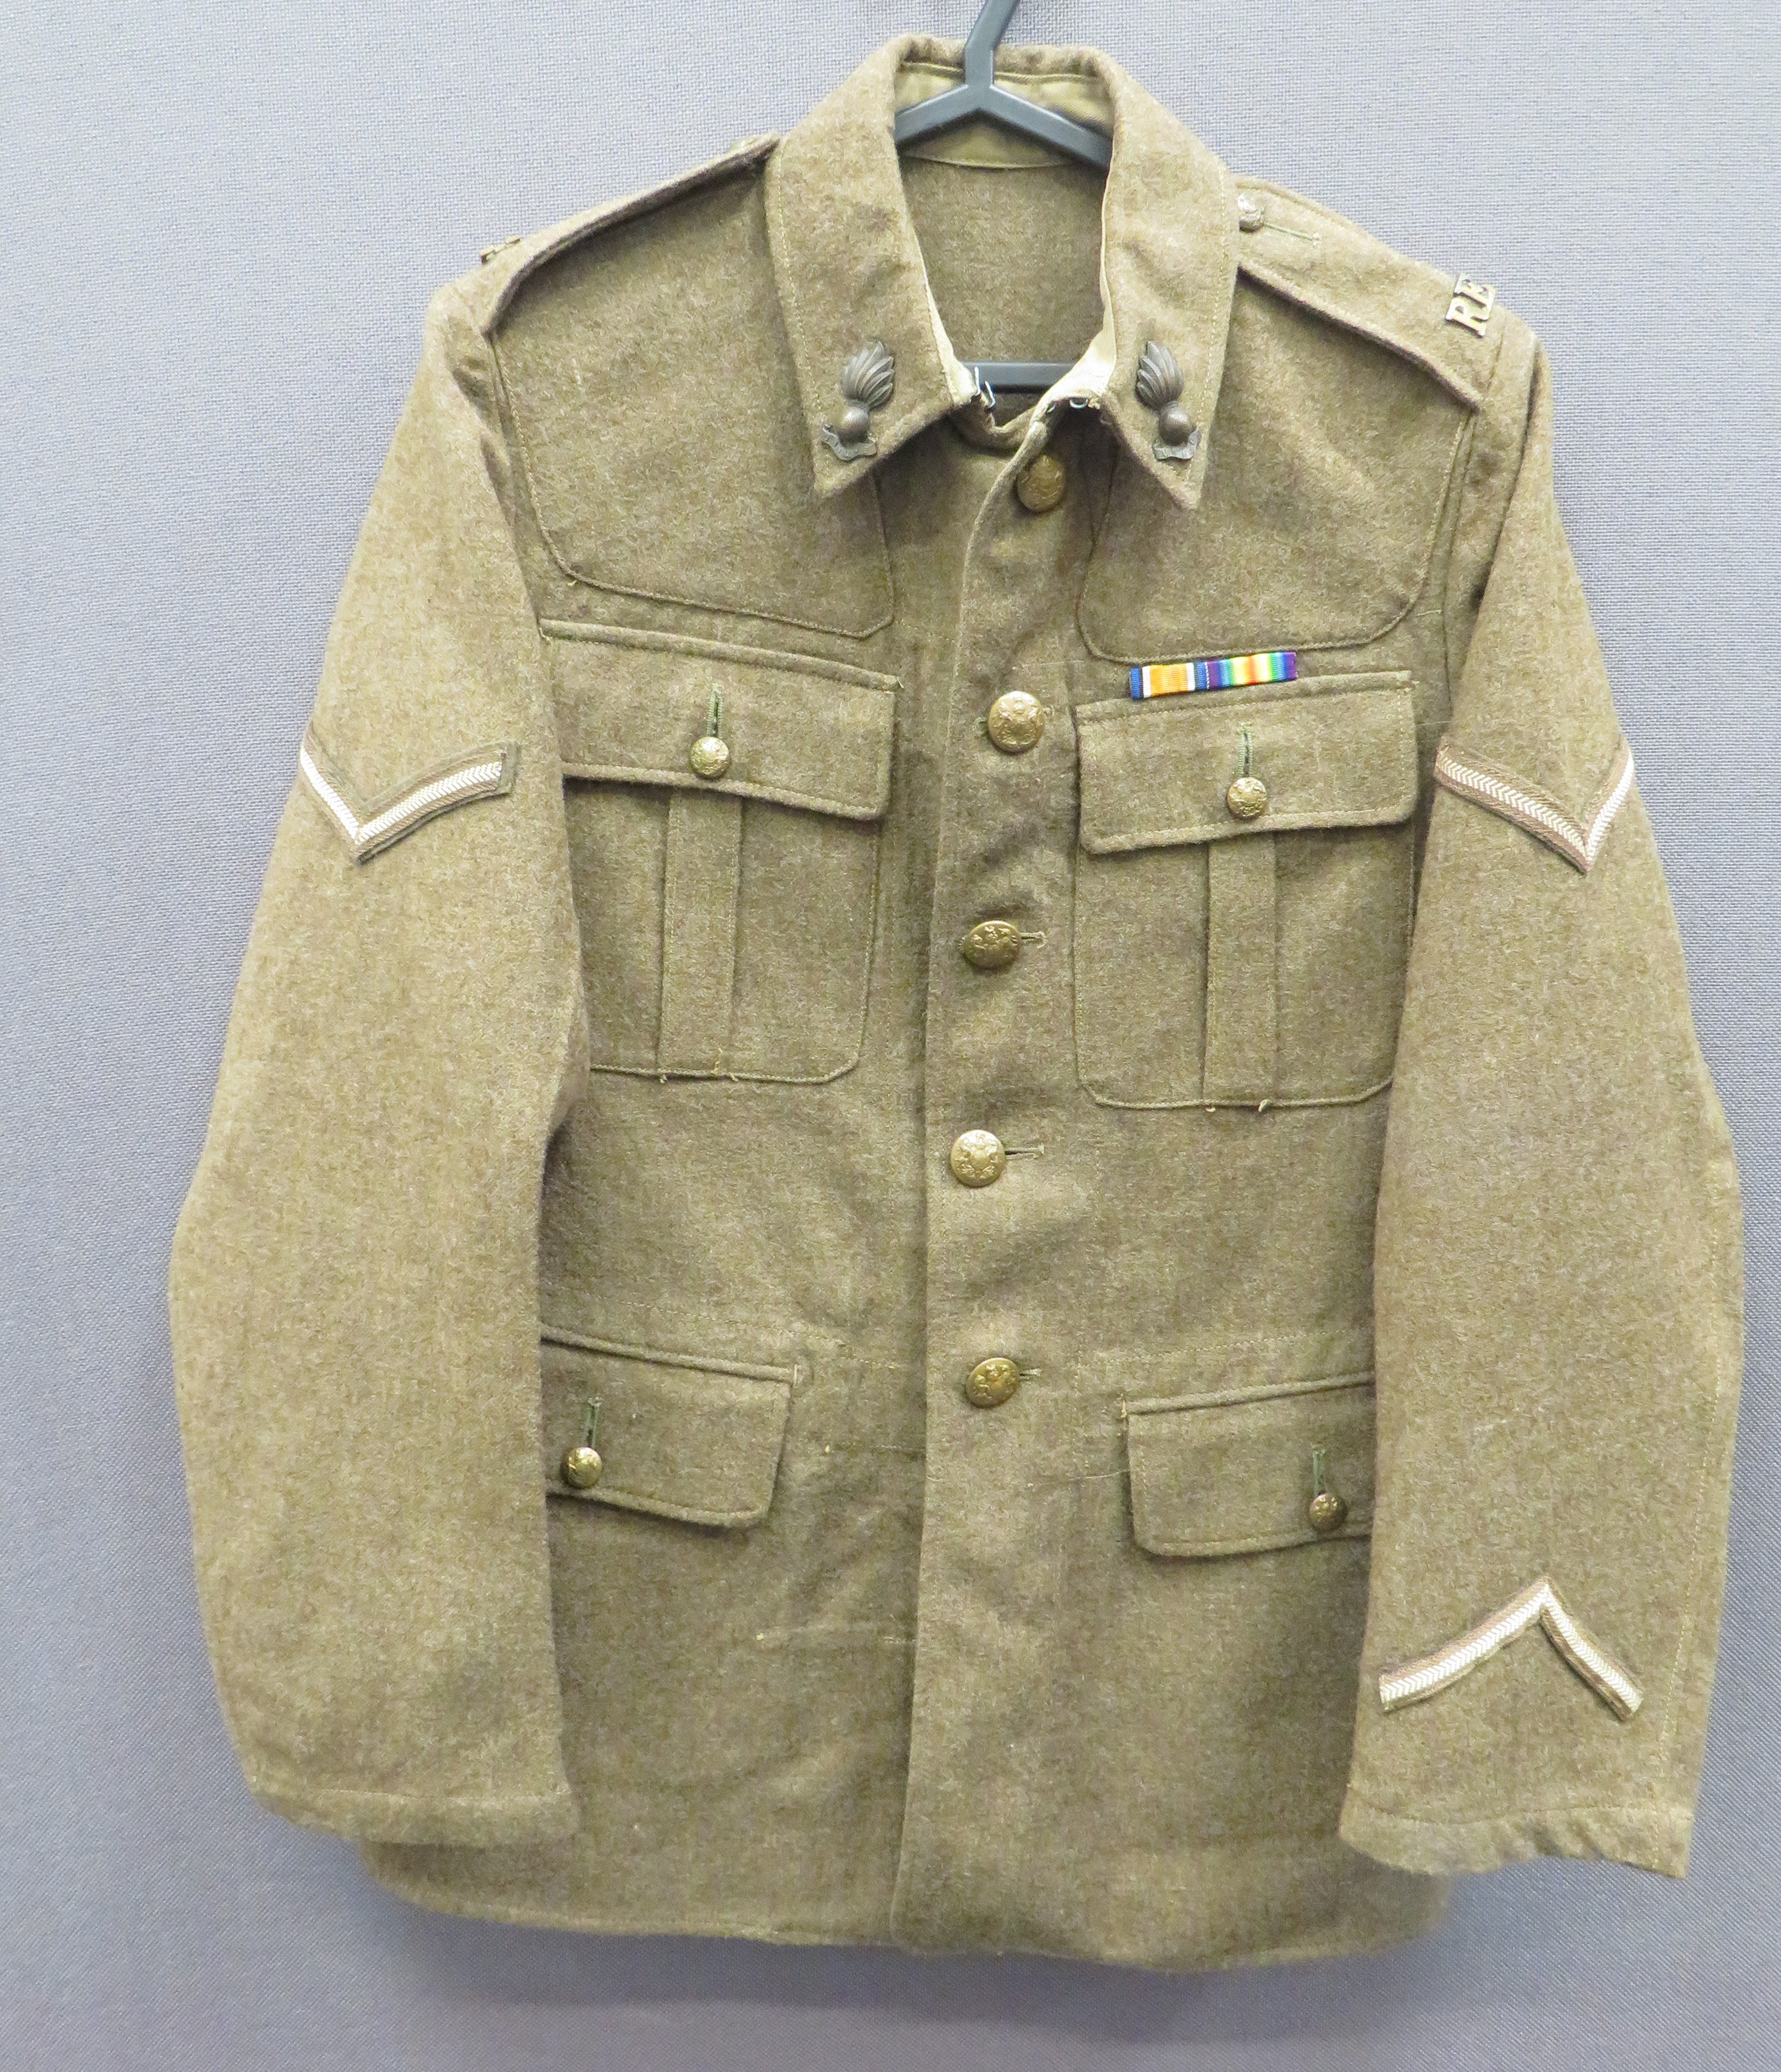 1922 Pattern Royal Engineers OR's Tunic khaki woollen, single breasted, high fold over collar tunic.